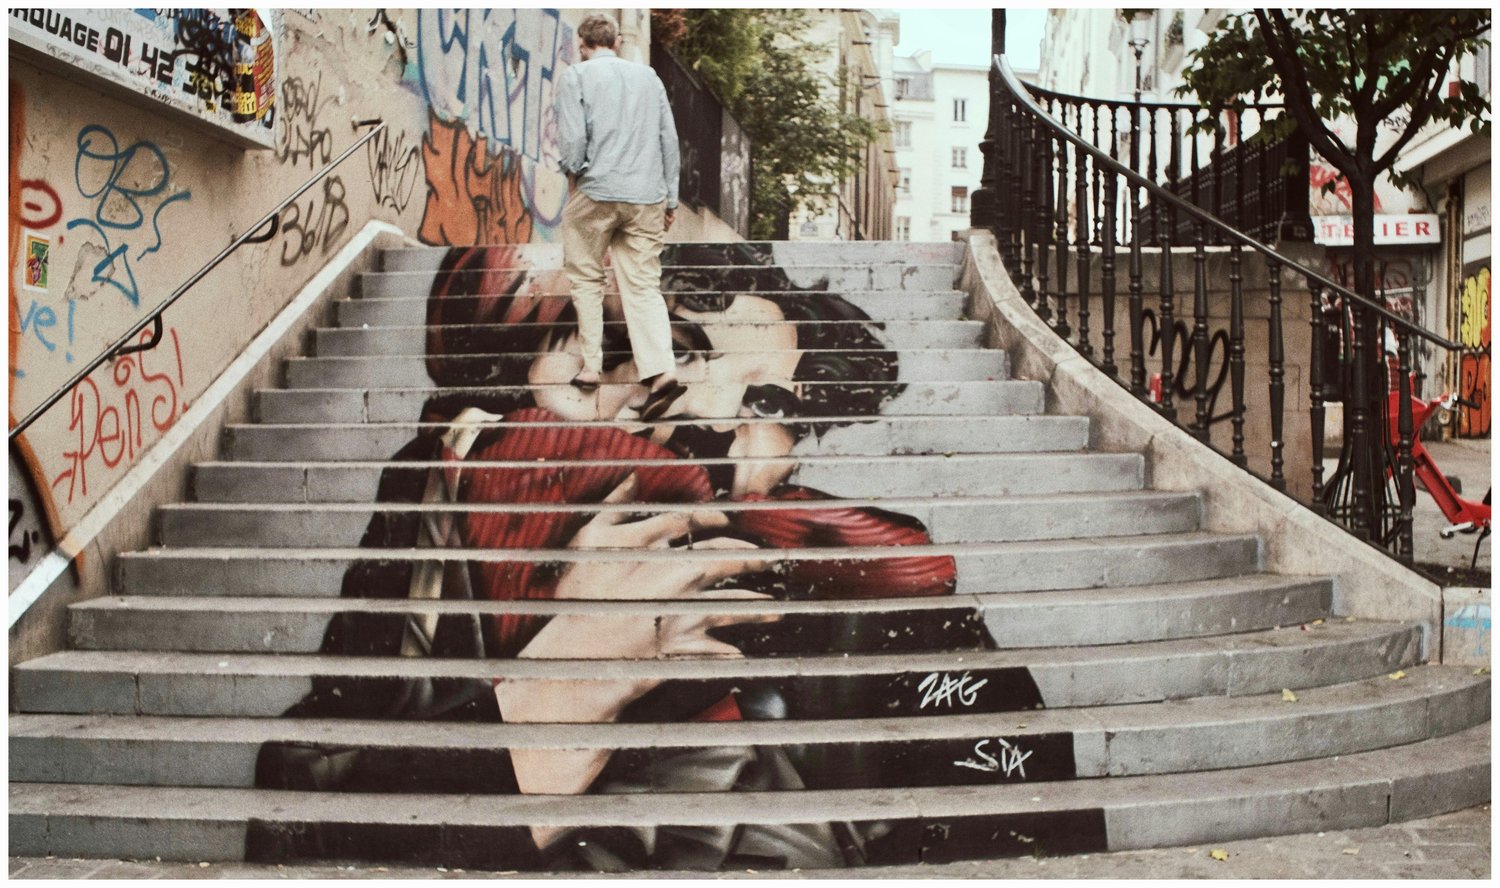 Man walking up stairs that has a mural painted on it.